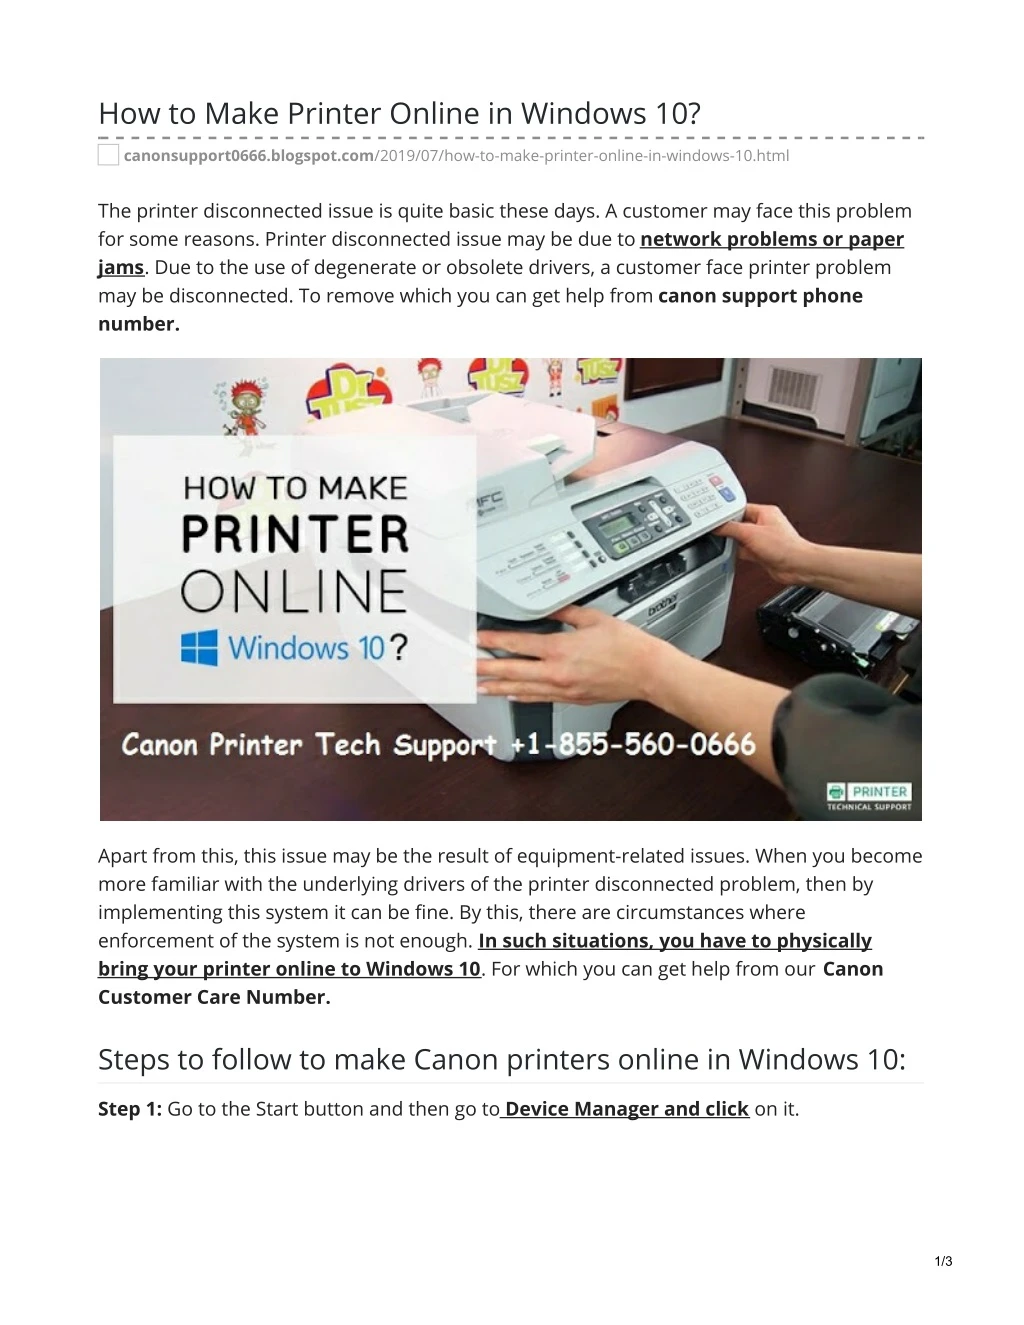 how to make printer online in windows 10